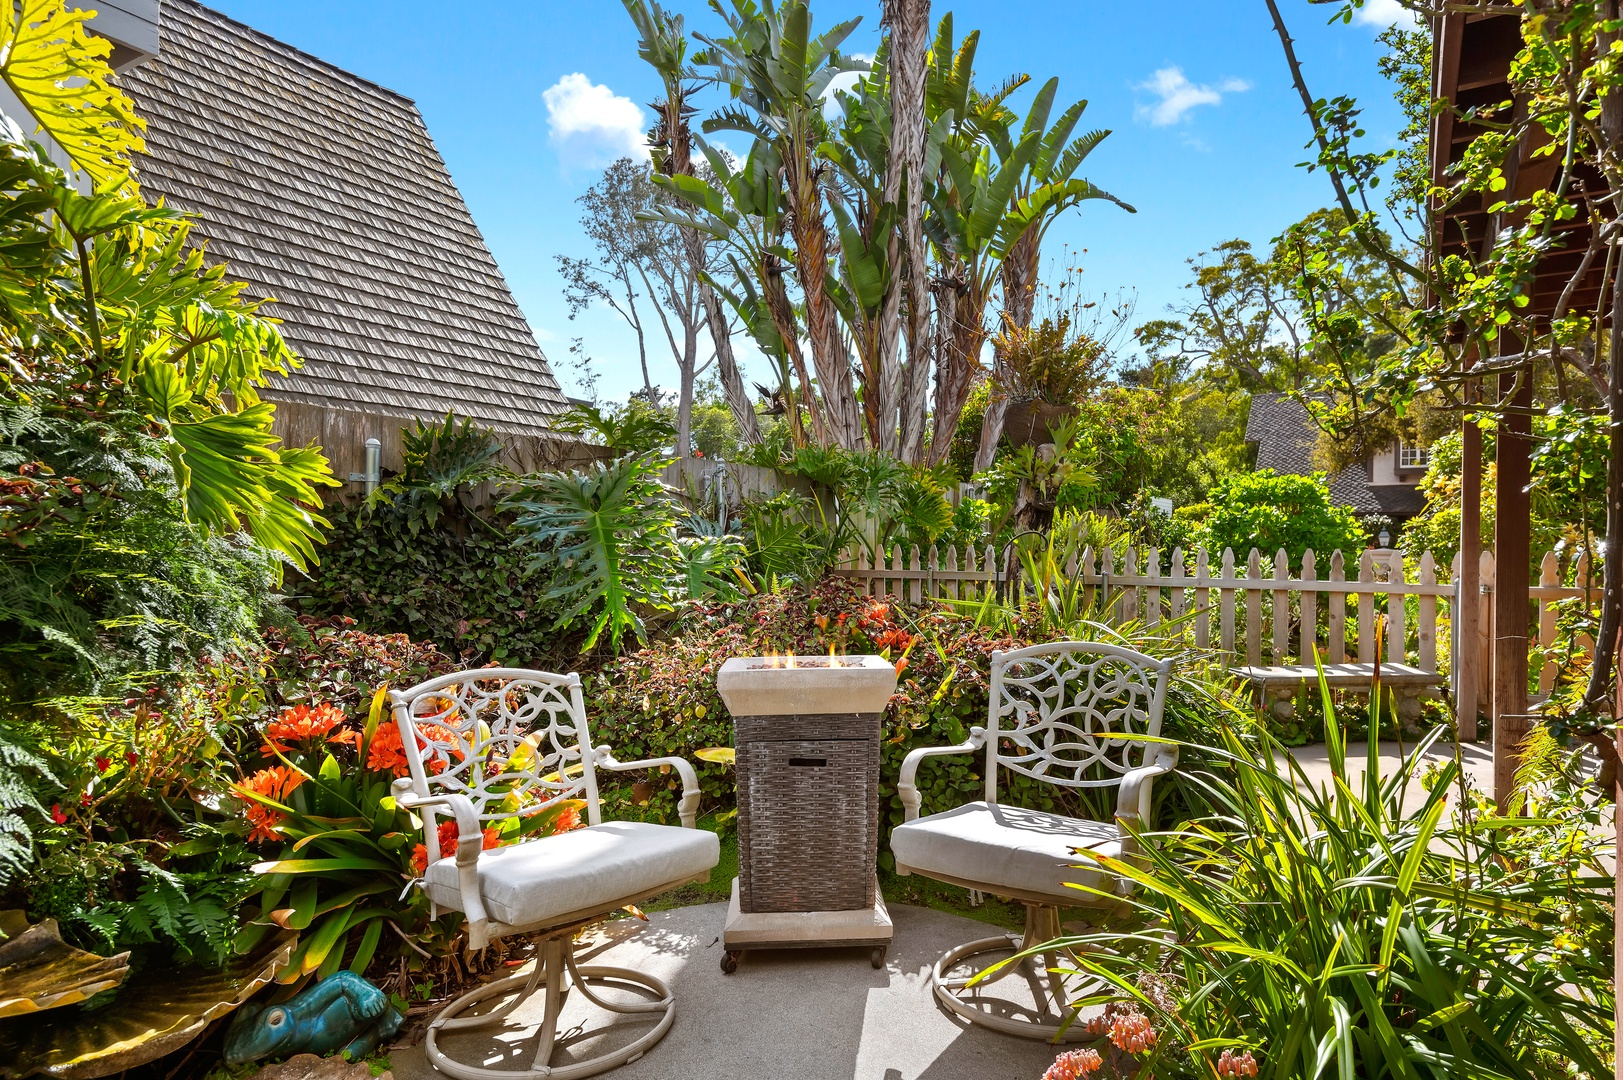 Kick back and relax next to a warming Firepit surrounded by enchanting gardens